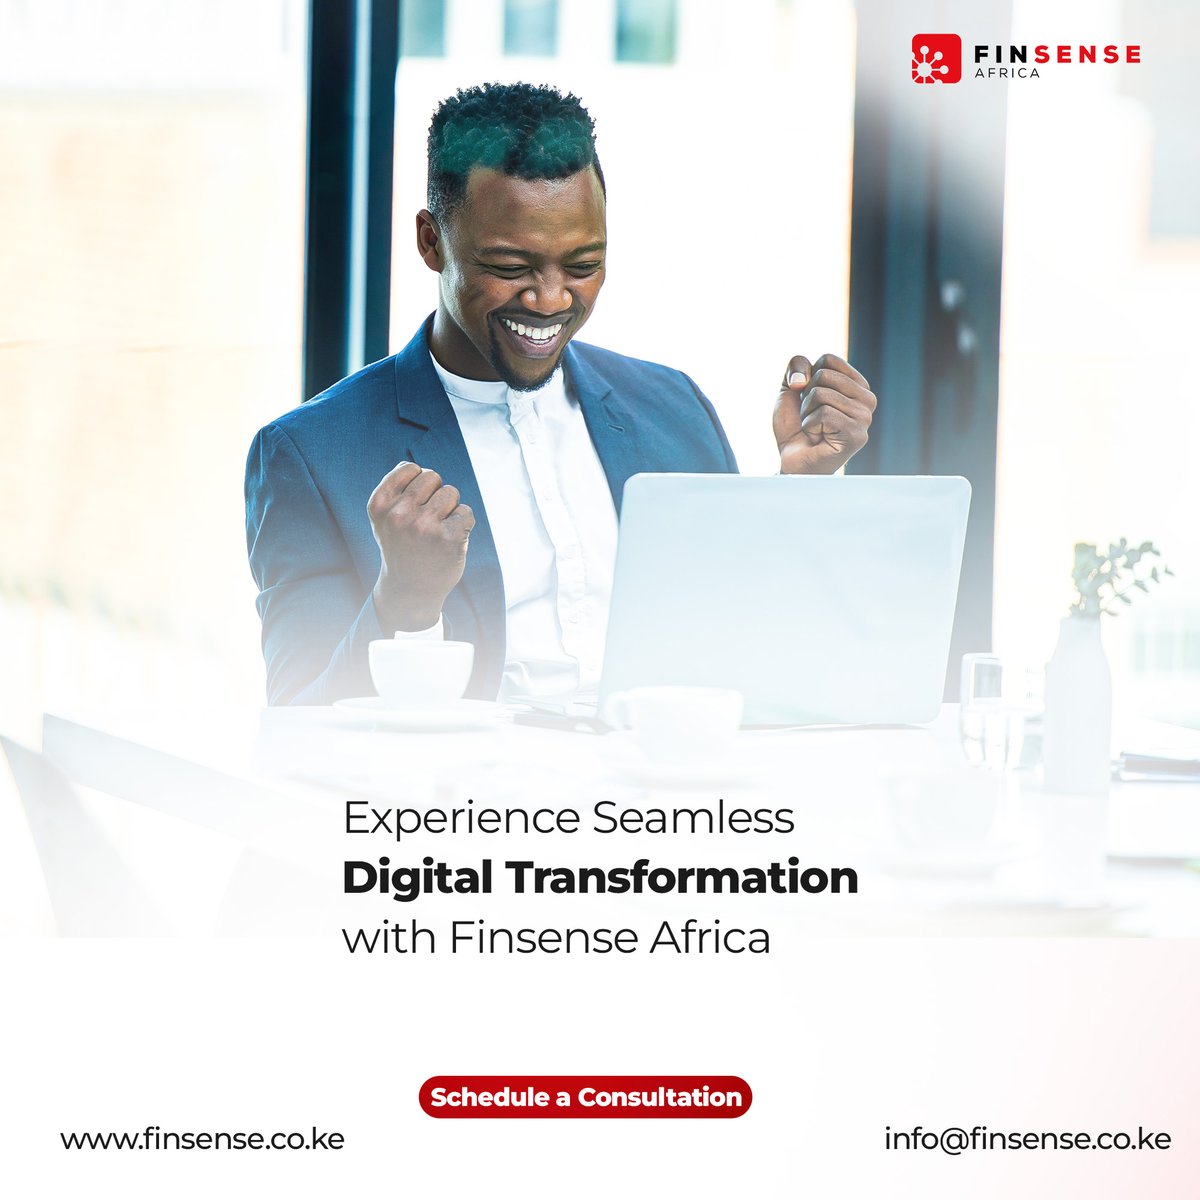 Tomorrow's competitors are digital today. Are you ready? Let us help you achieve a seamless digital transformation. Contact us at info@finsense.co.ke